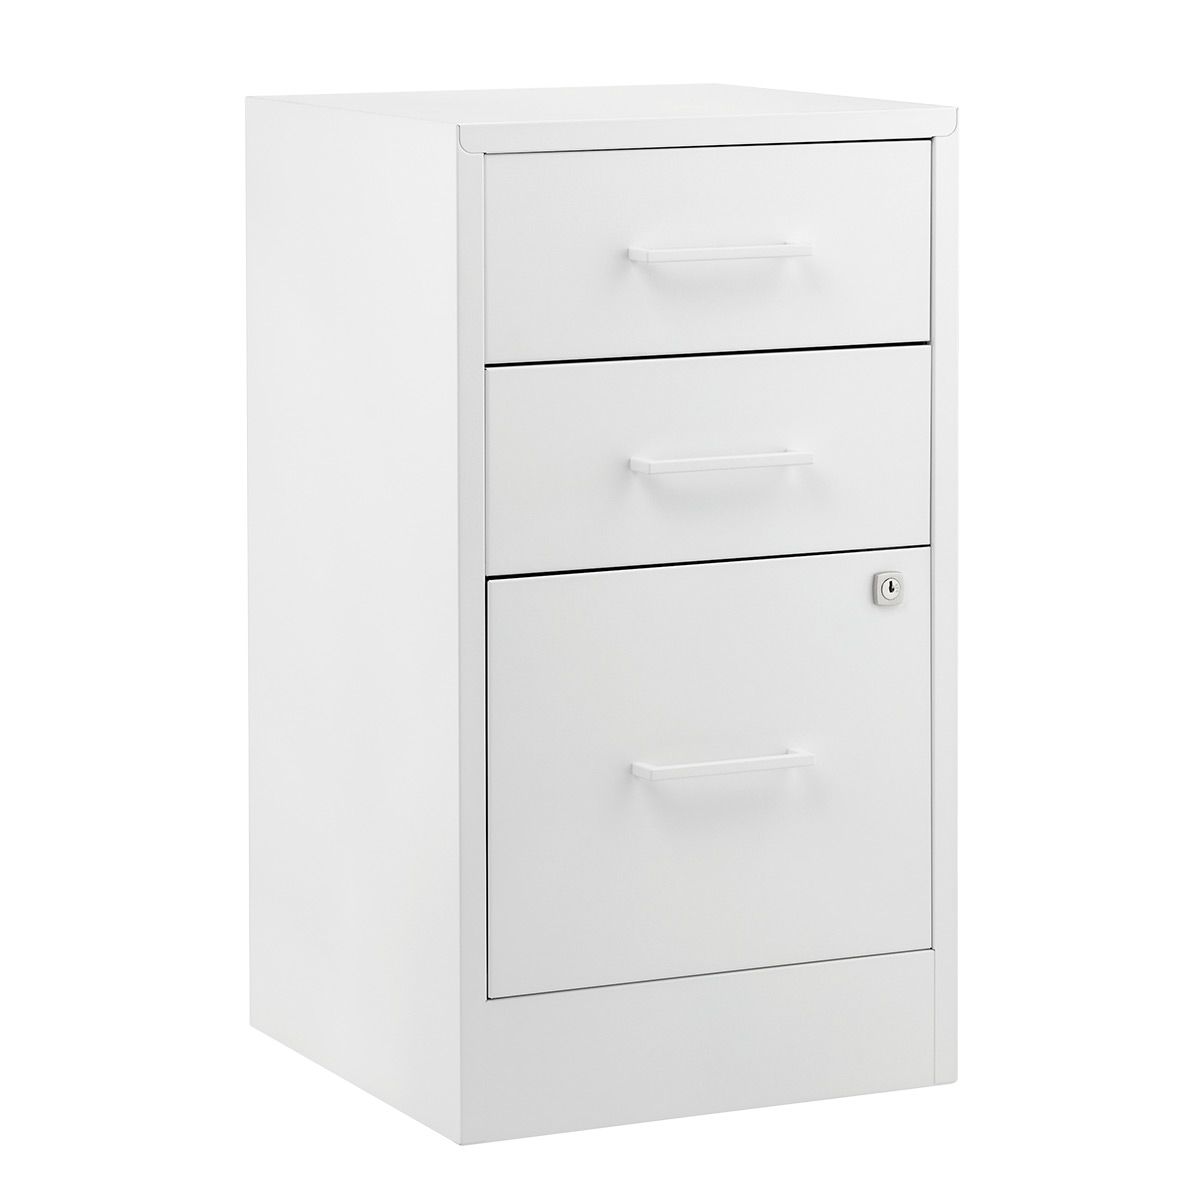 2-Drawer White Locking Filing Cabinet | The Container Store